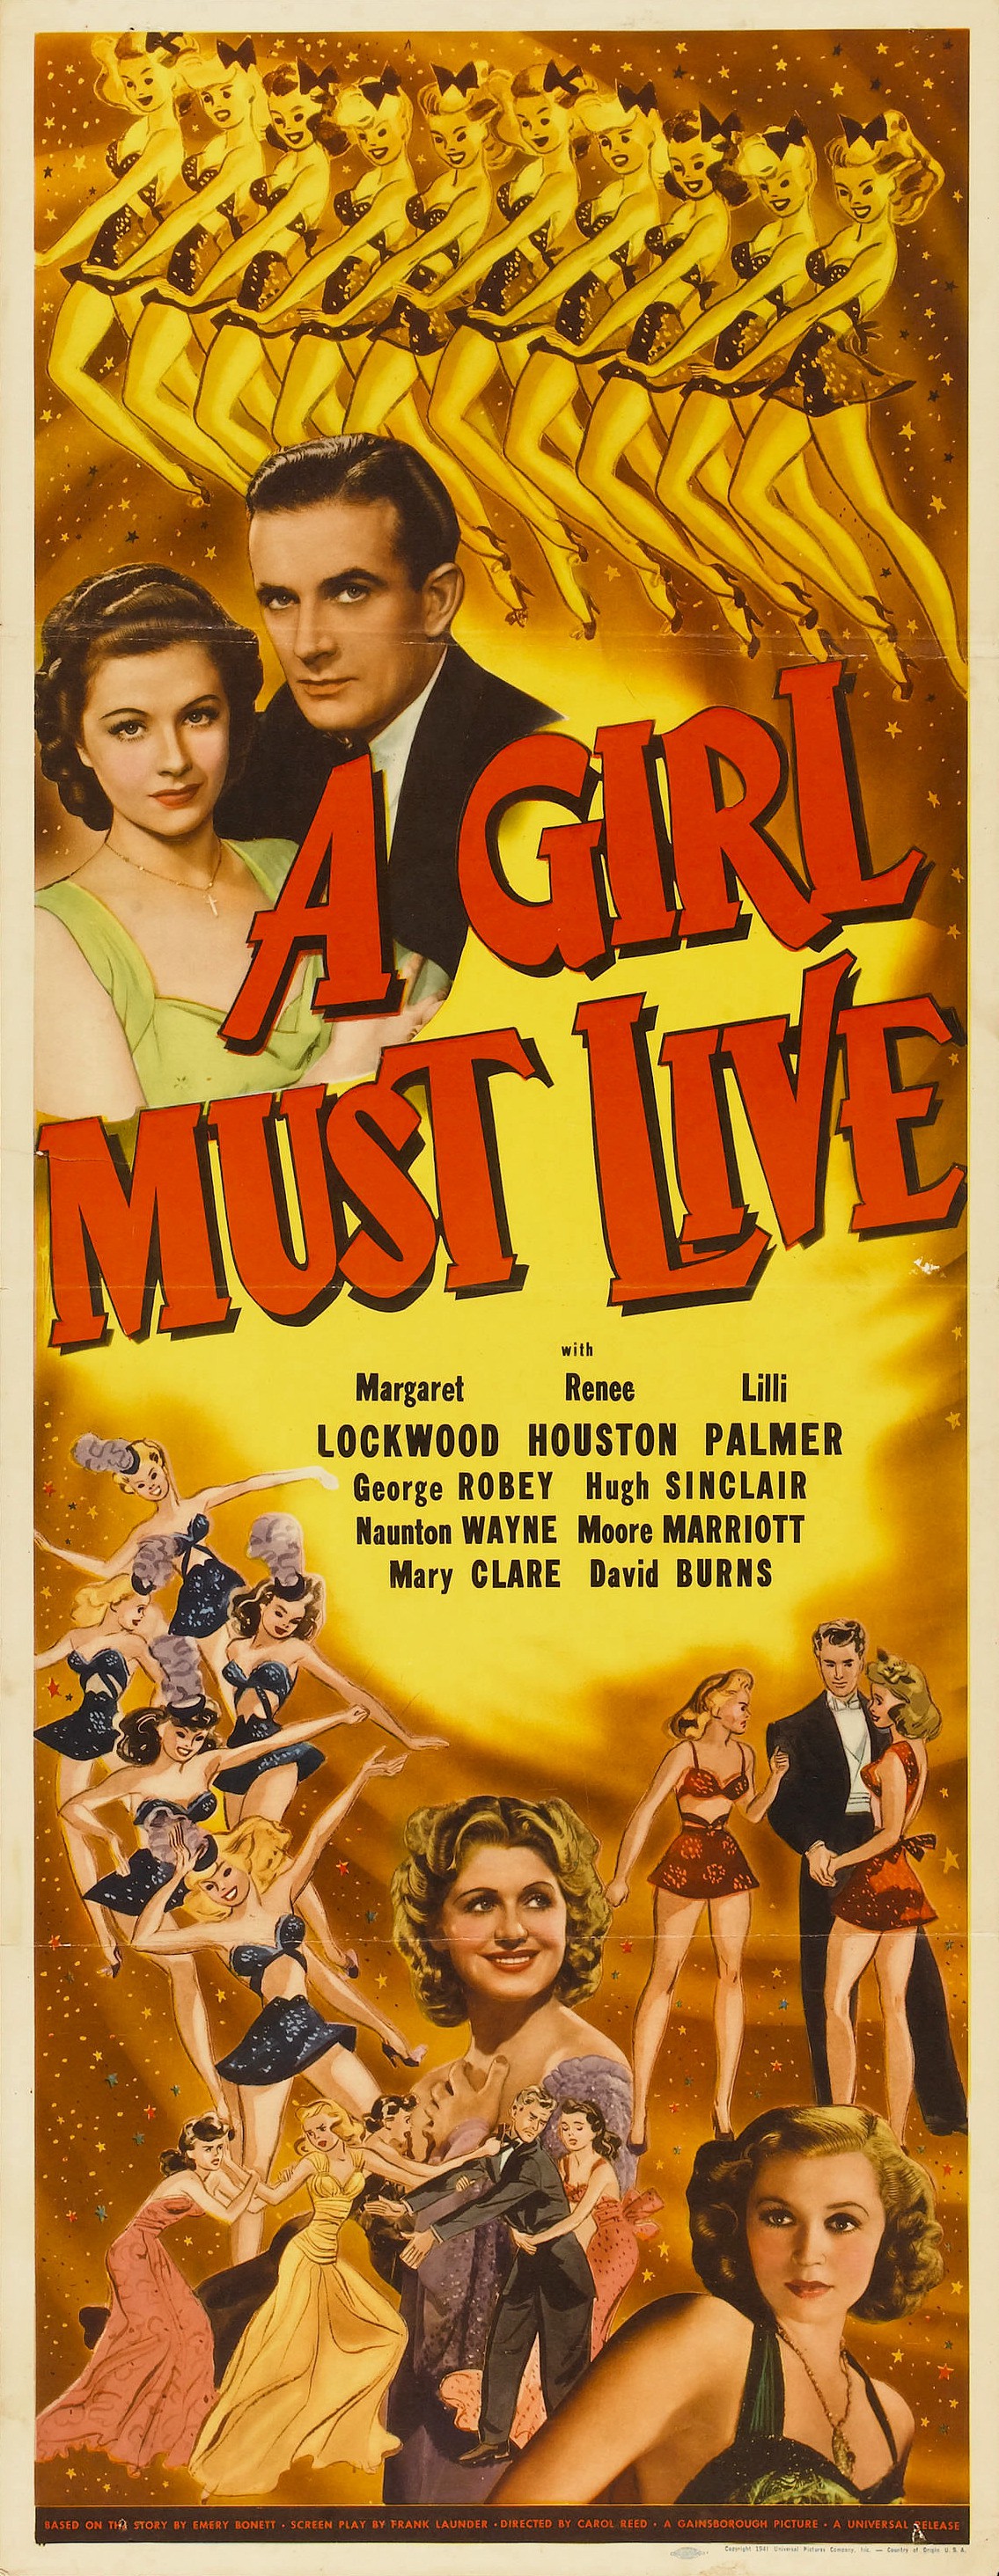 Mega Sized Movie Poster Image for A Girl Must Live 